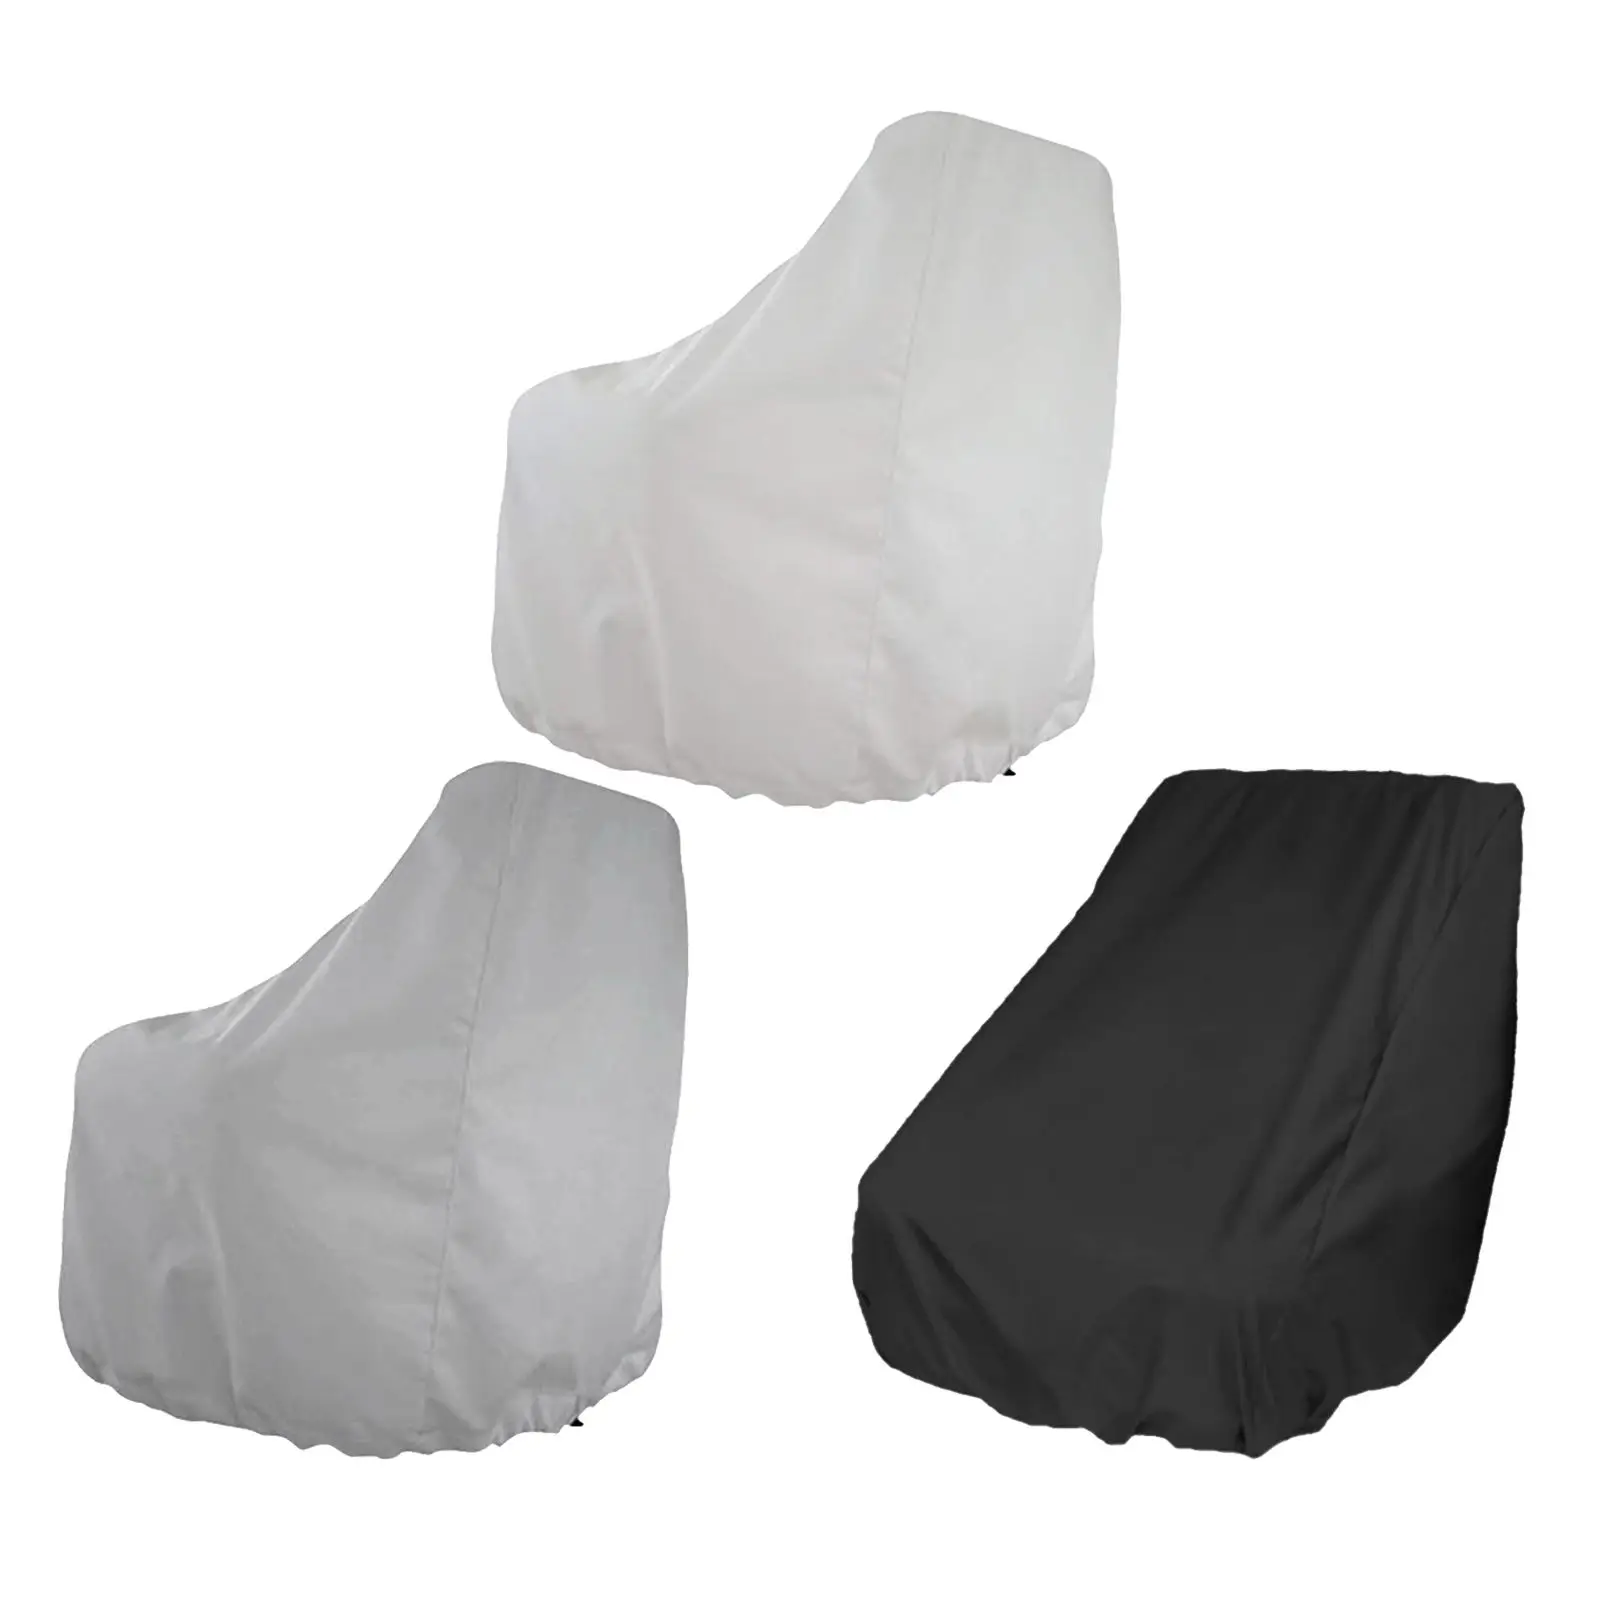 Waterproof Outdoor Foldable Boat Seat Cover Ship UV Resistant Yacht Captain Chair Elastic Closure Dustproof Protection